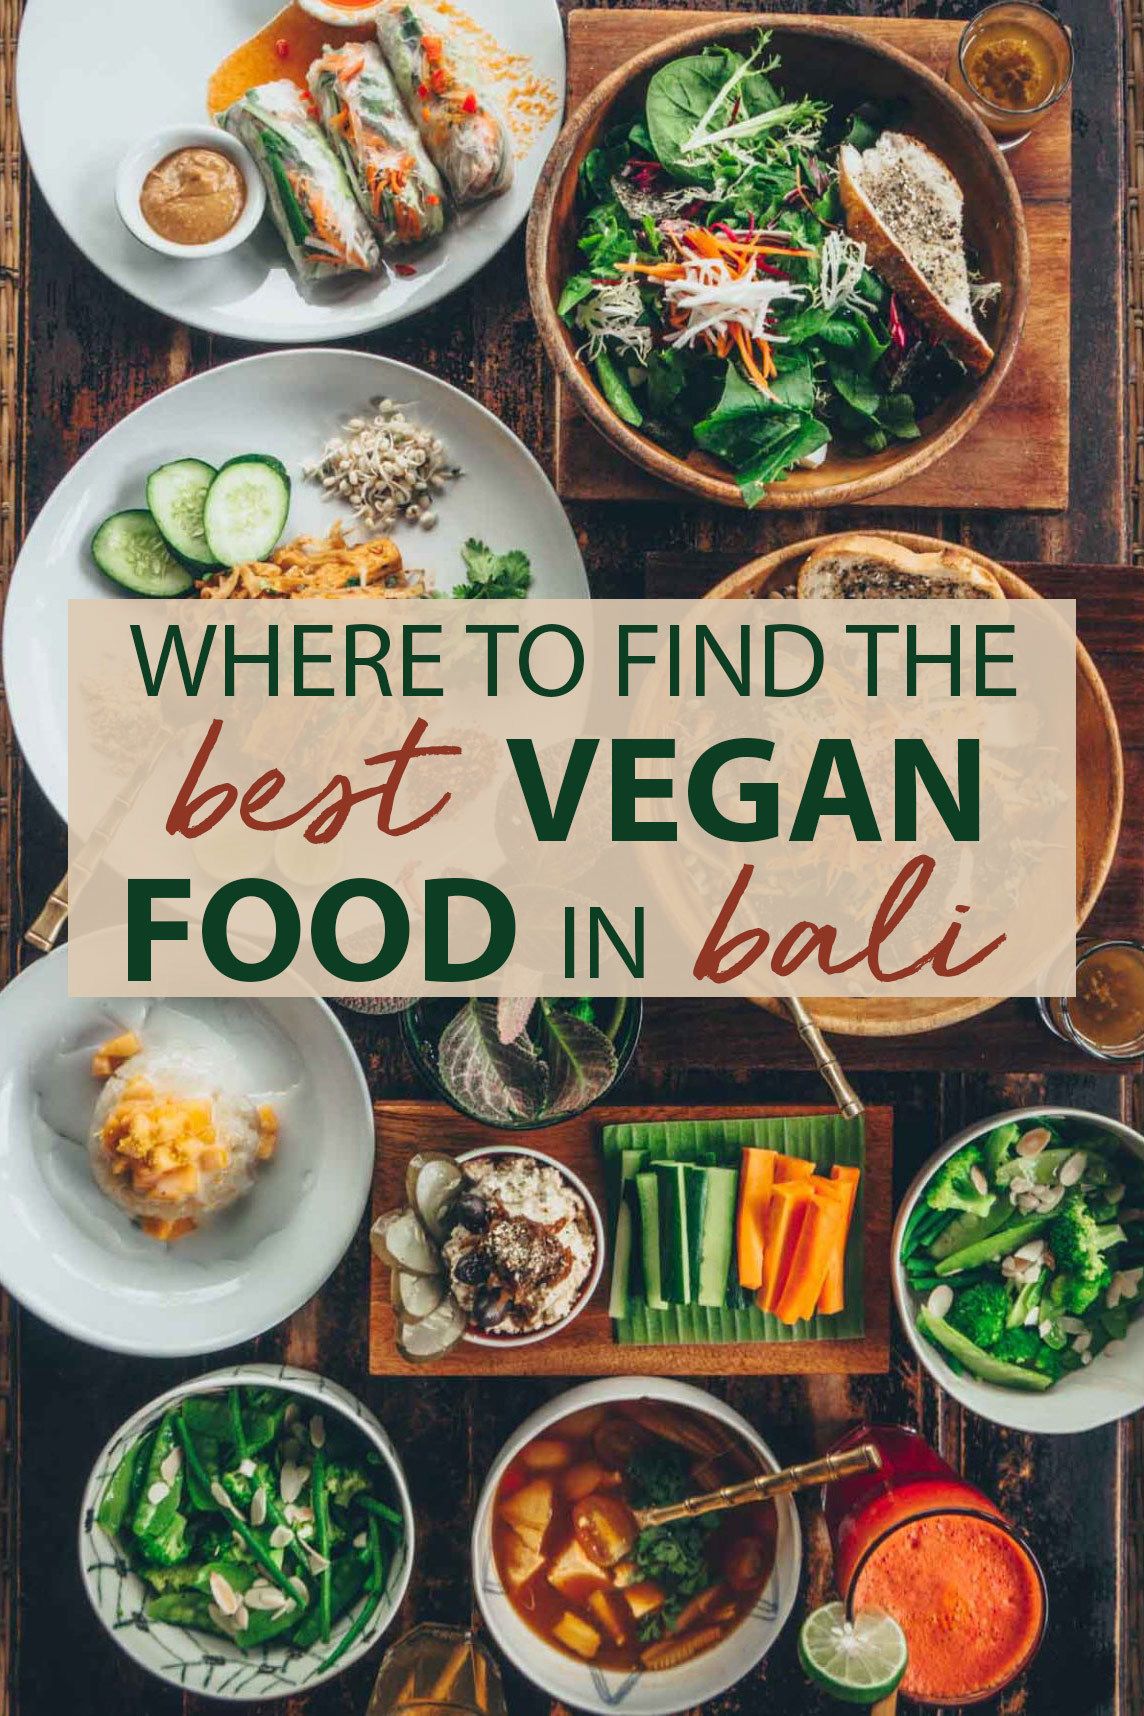 Where to Find the Best Vegan Food in Bali